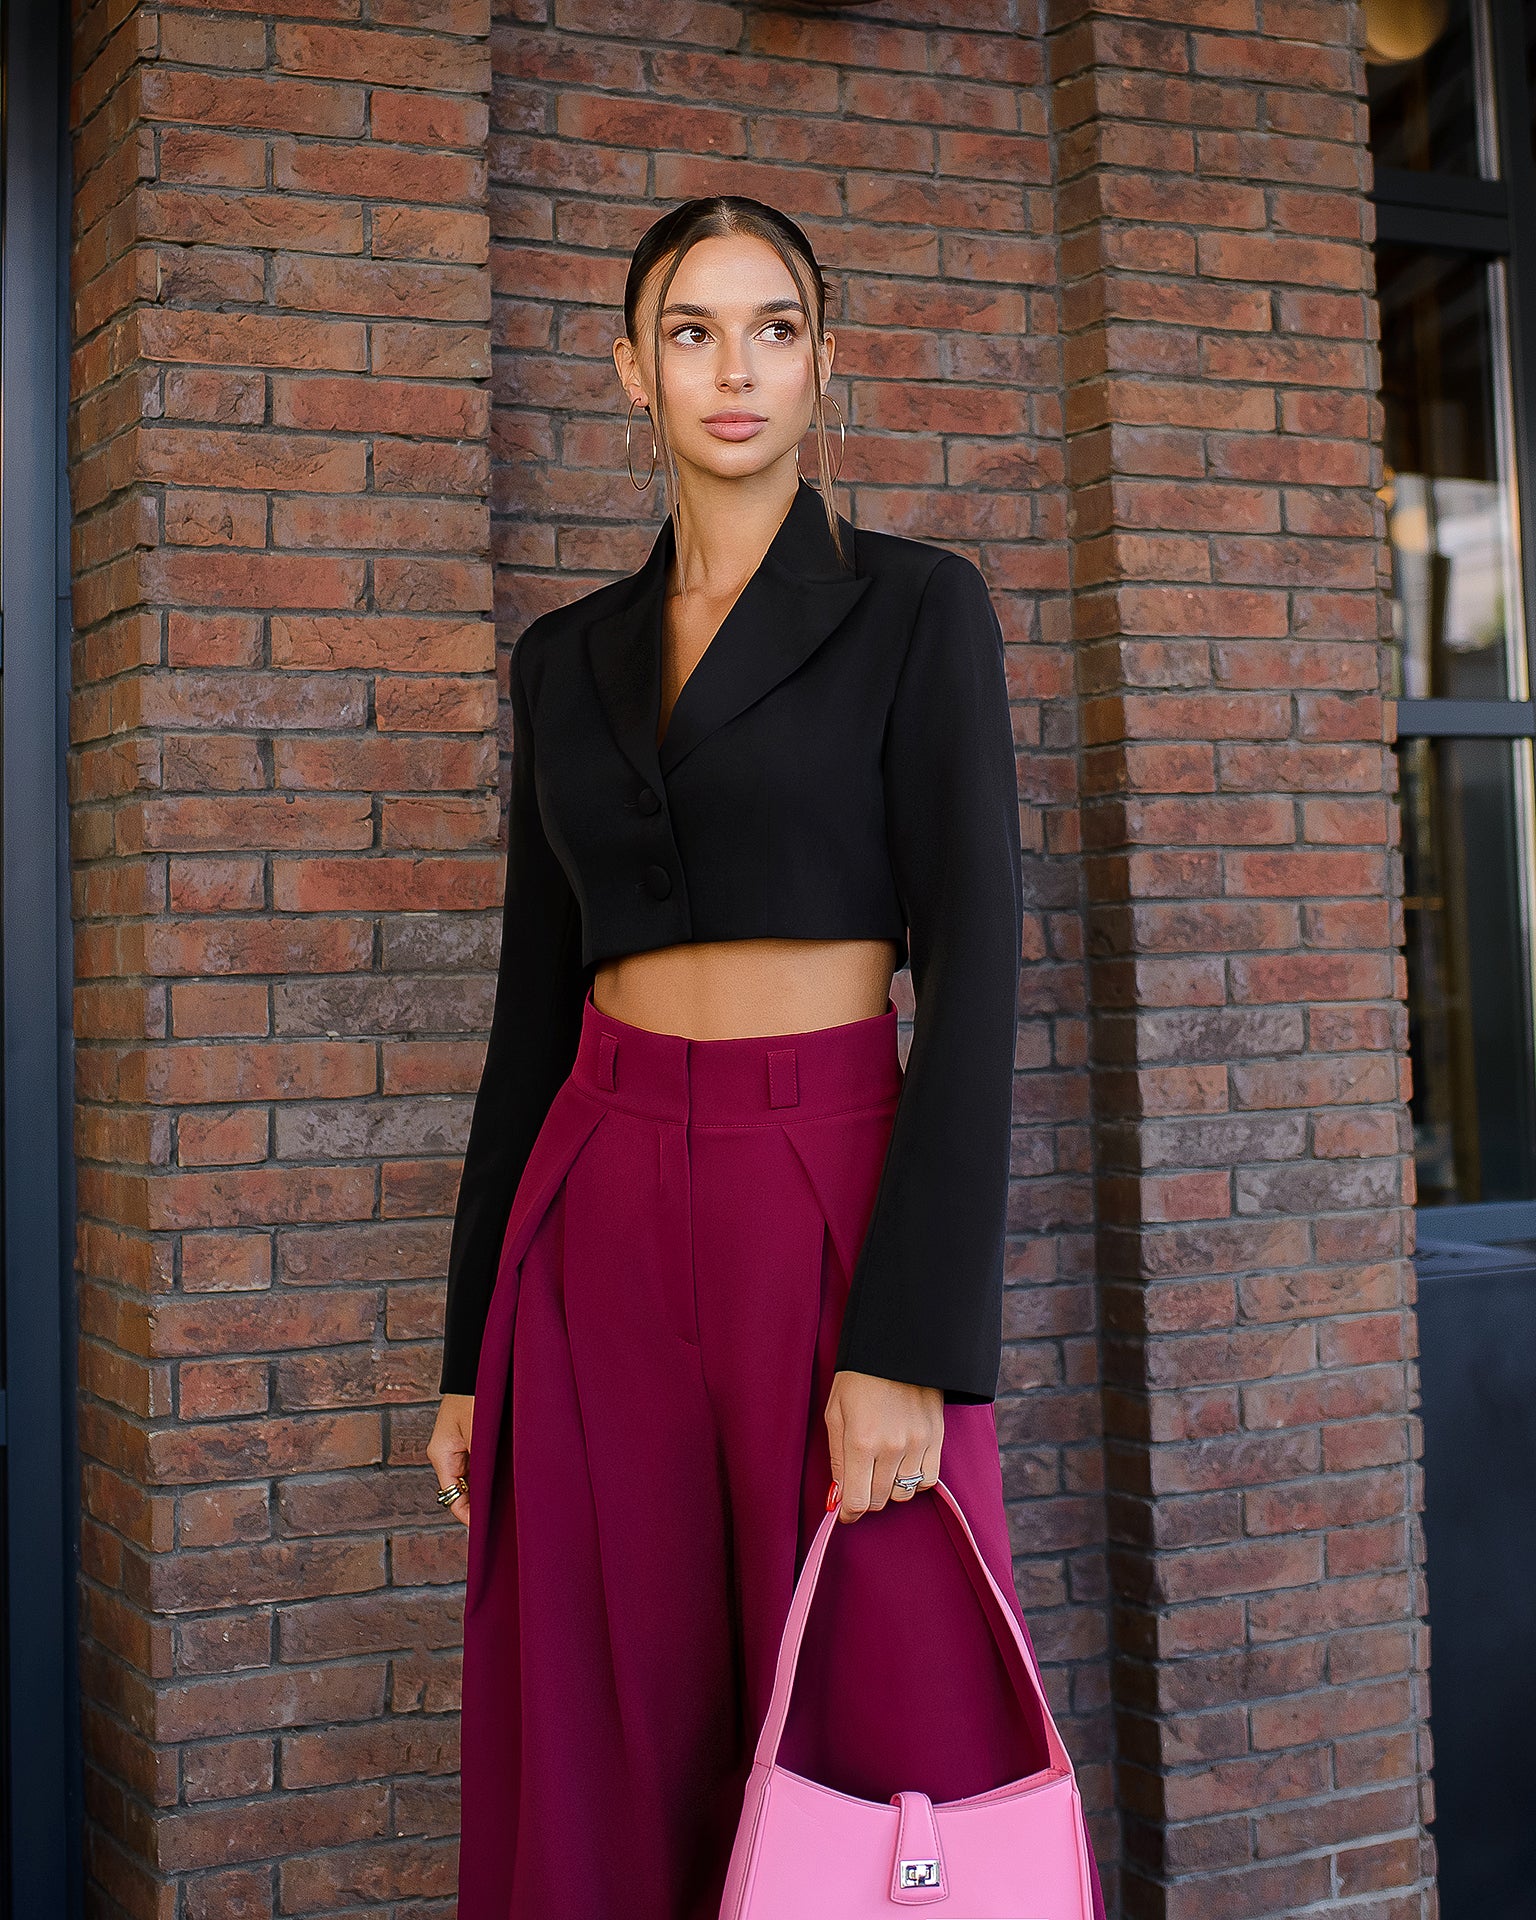 Bordeaux High Waist Fitted Palazzo Pants